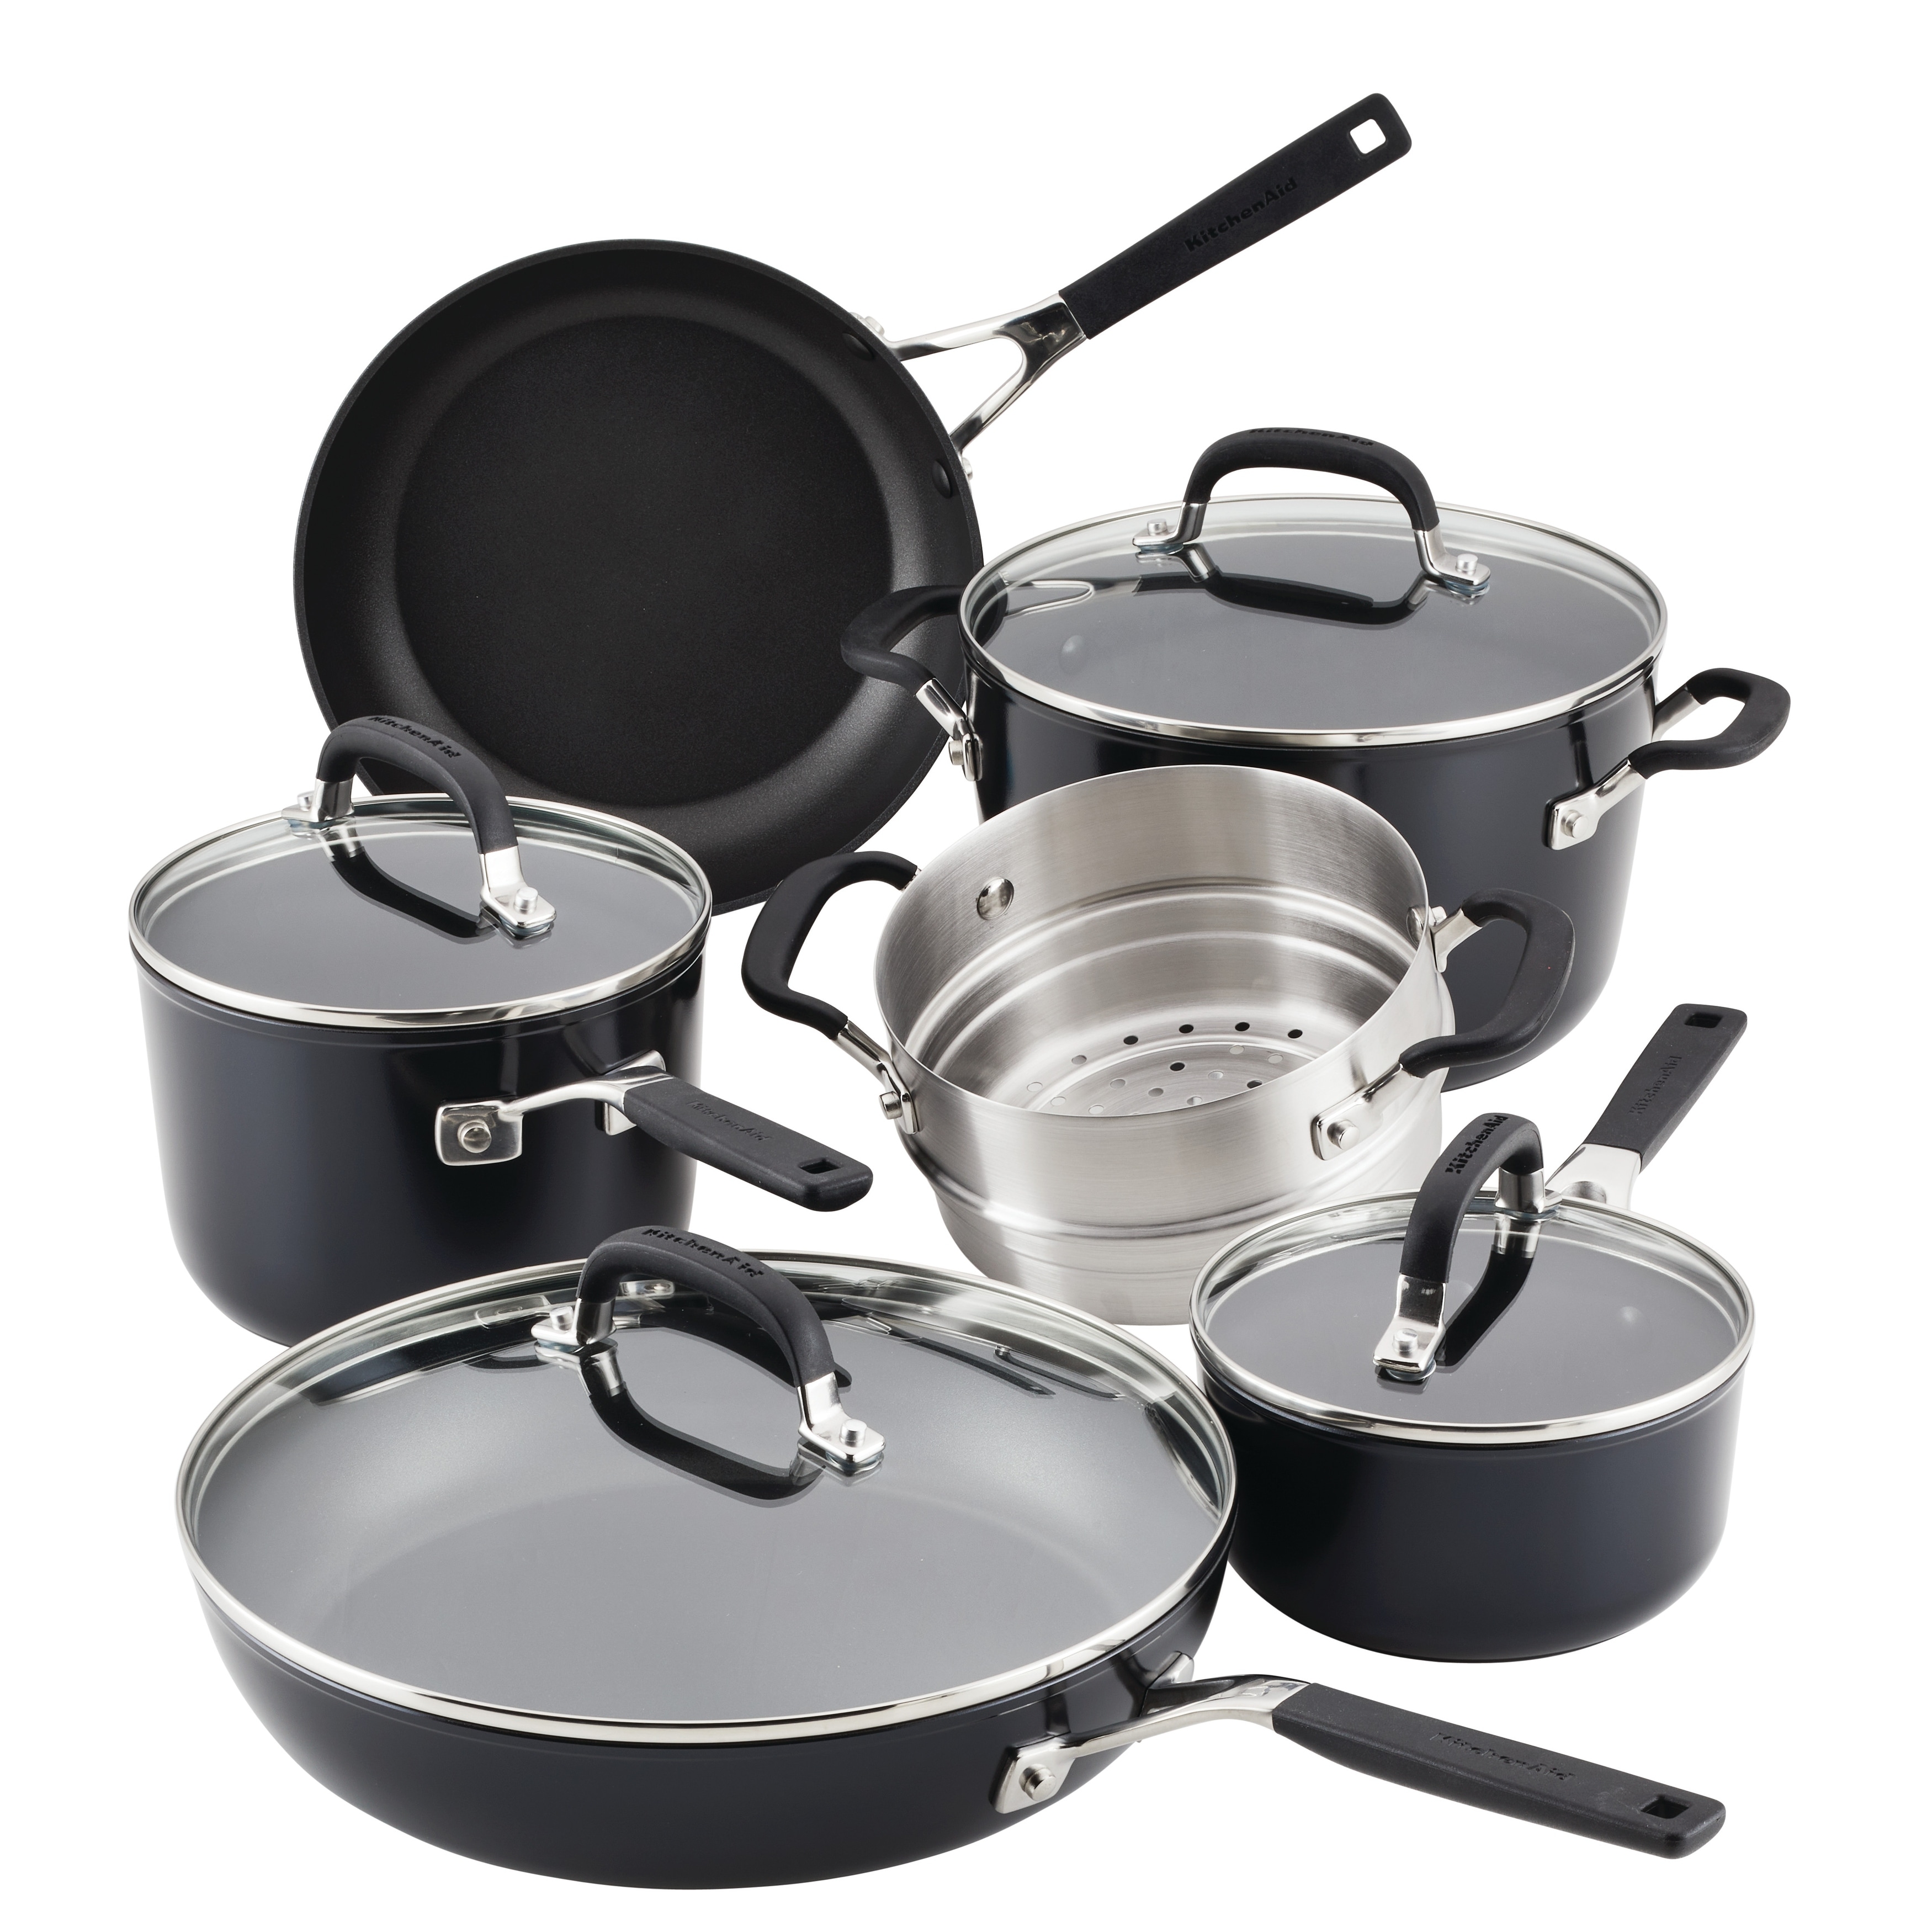 https://ak1.ostkcdn.com/images/products/is/images/direct/8f60870bd74cde46ef628d0ba450b783c8fdfcd1/KitchenAid-Hard-Anodized-Nonstick-Cookware-Pots-and-Pans-Set%2C-10-Piece%2C-Onyx-Black.jpg